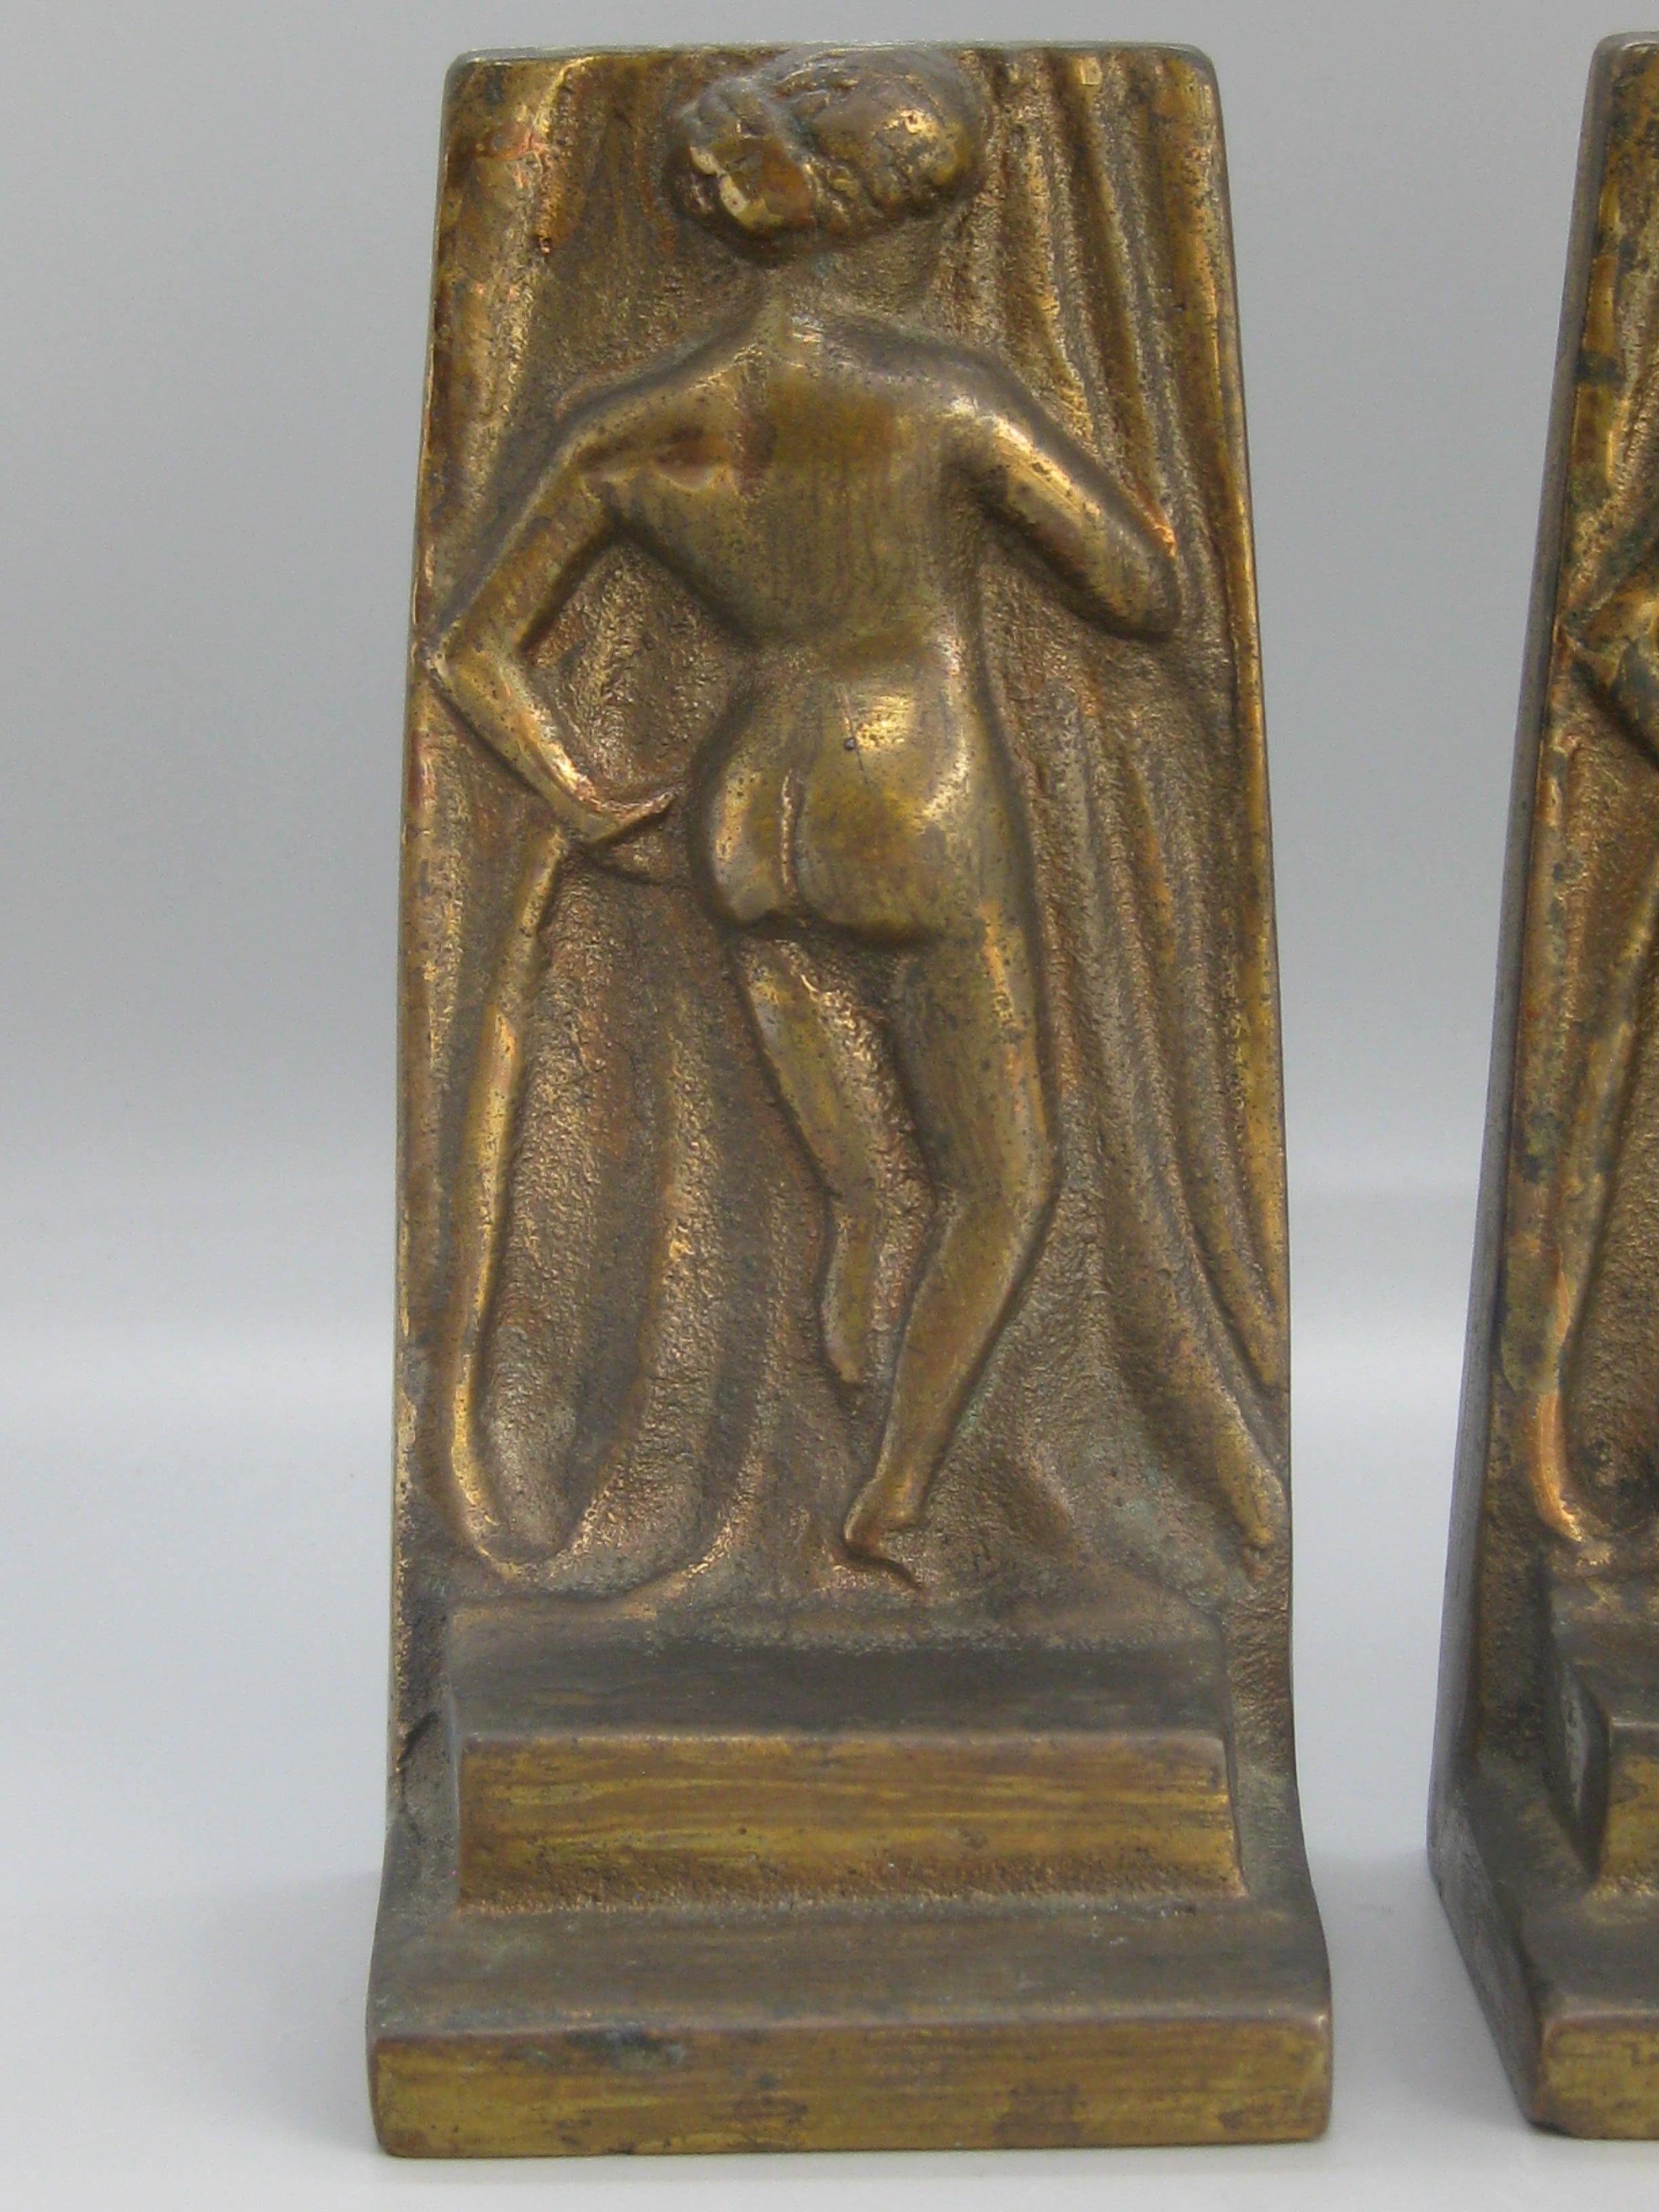 Great pair of antique Art Deco nude lady/woman figural cast brass bookends and date from the 1920s-early 1930s. These are made of cast brass and have a nice dark patina. Can be polished if desired. No maker marks, but made well. In nice original